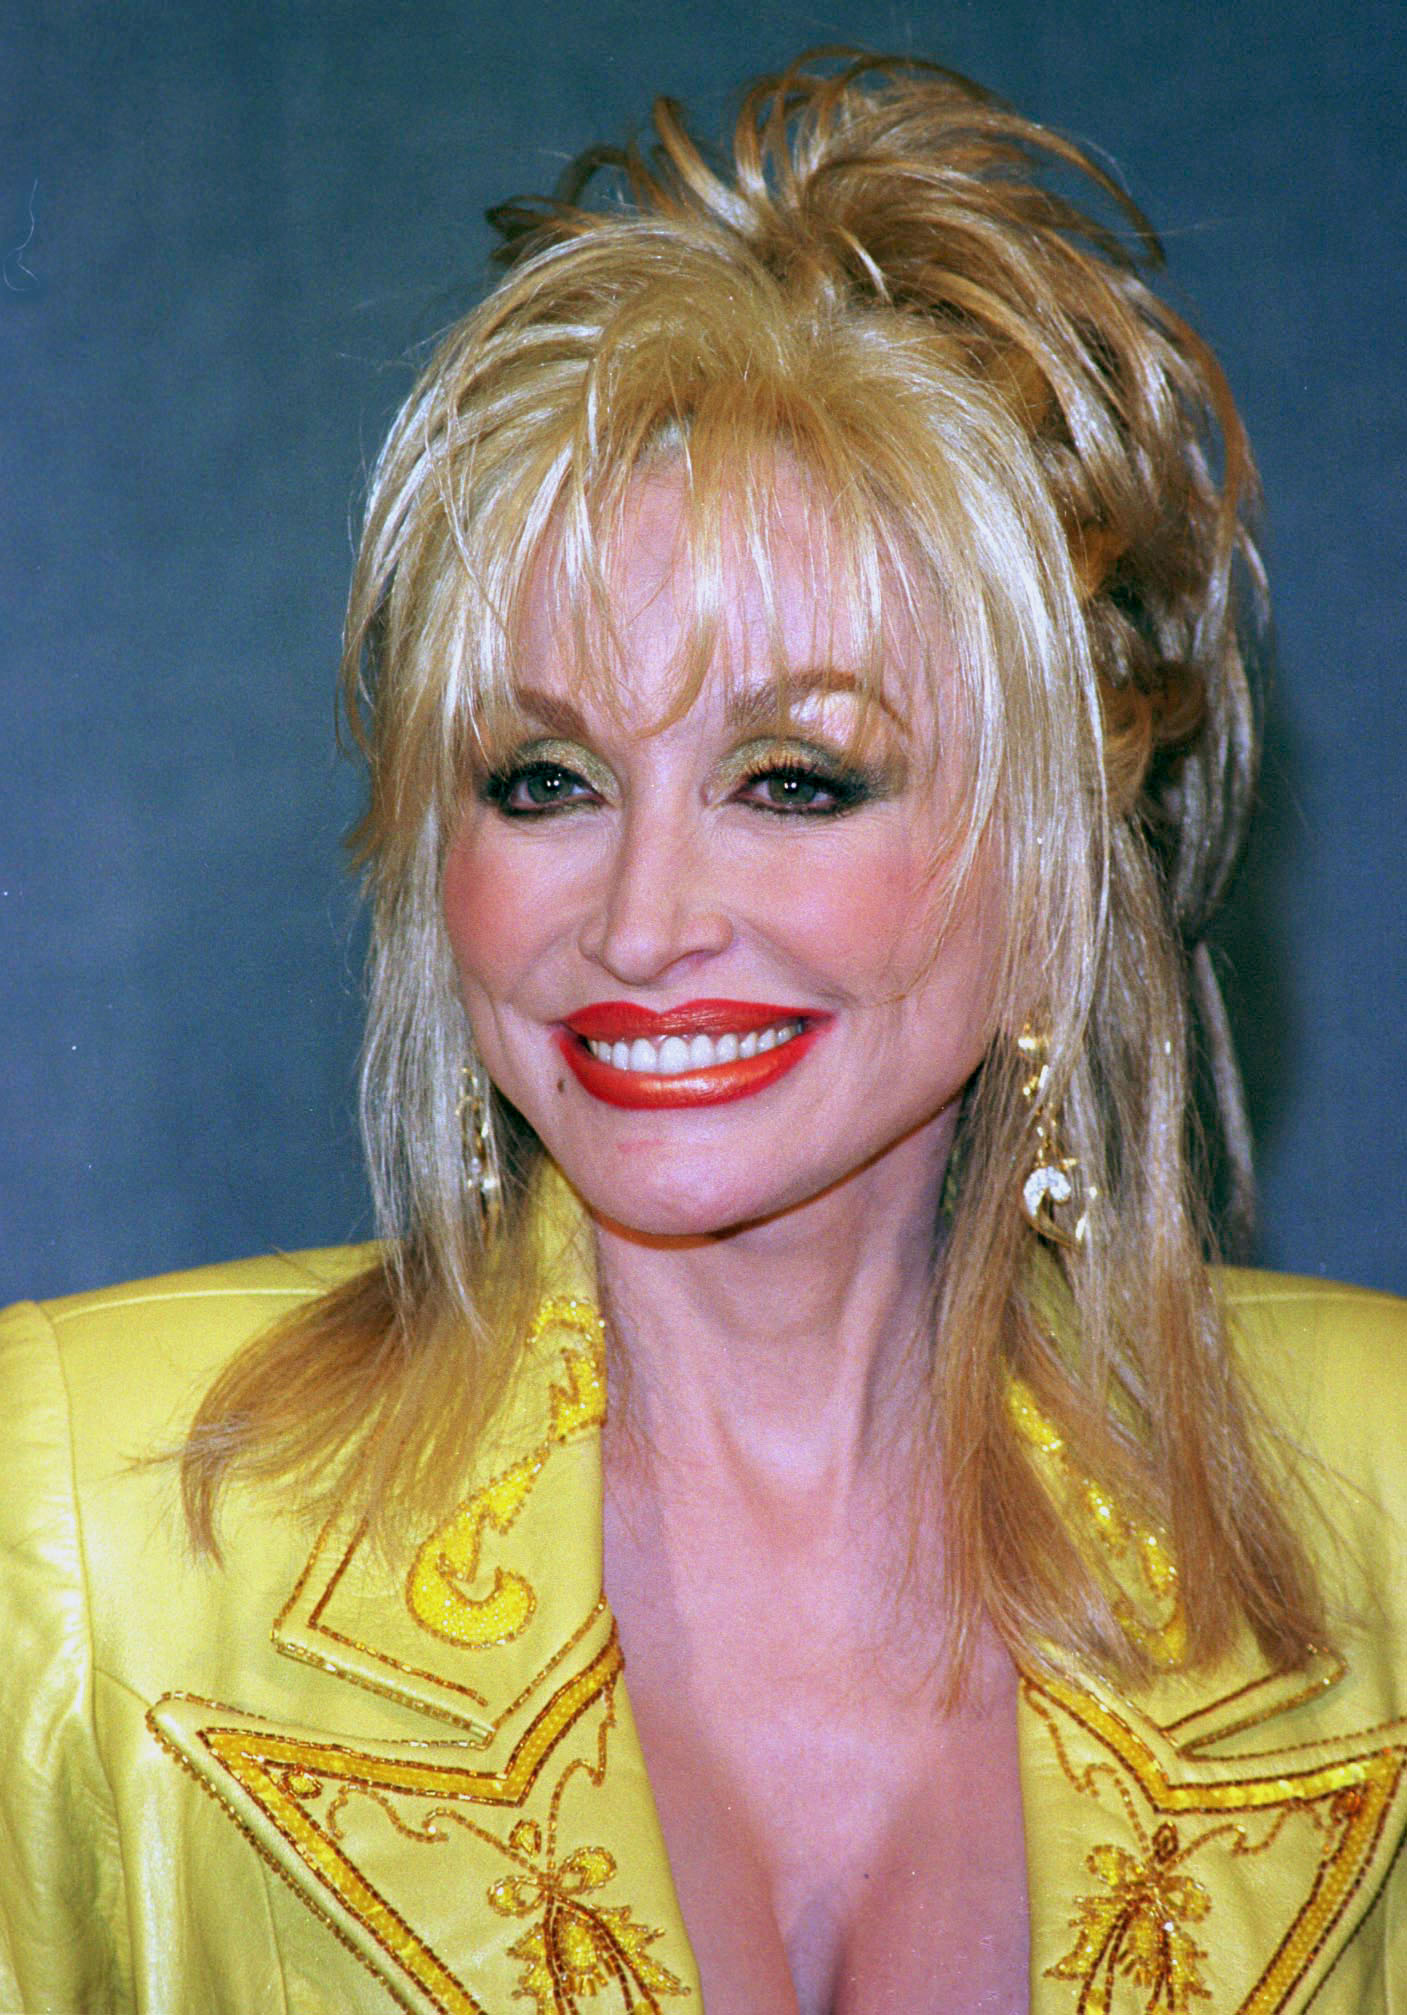 Dolly Parton portrait taken in 2000 | Source: Getty Images